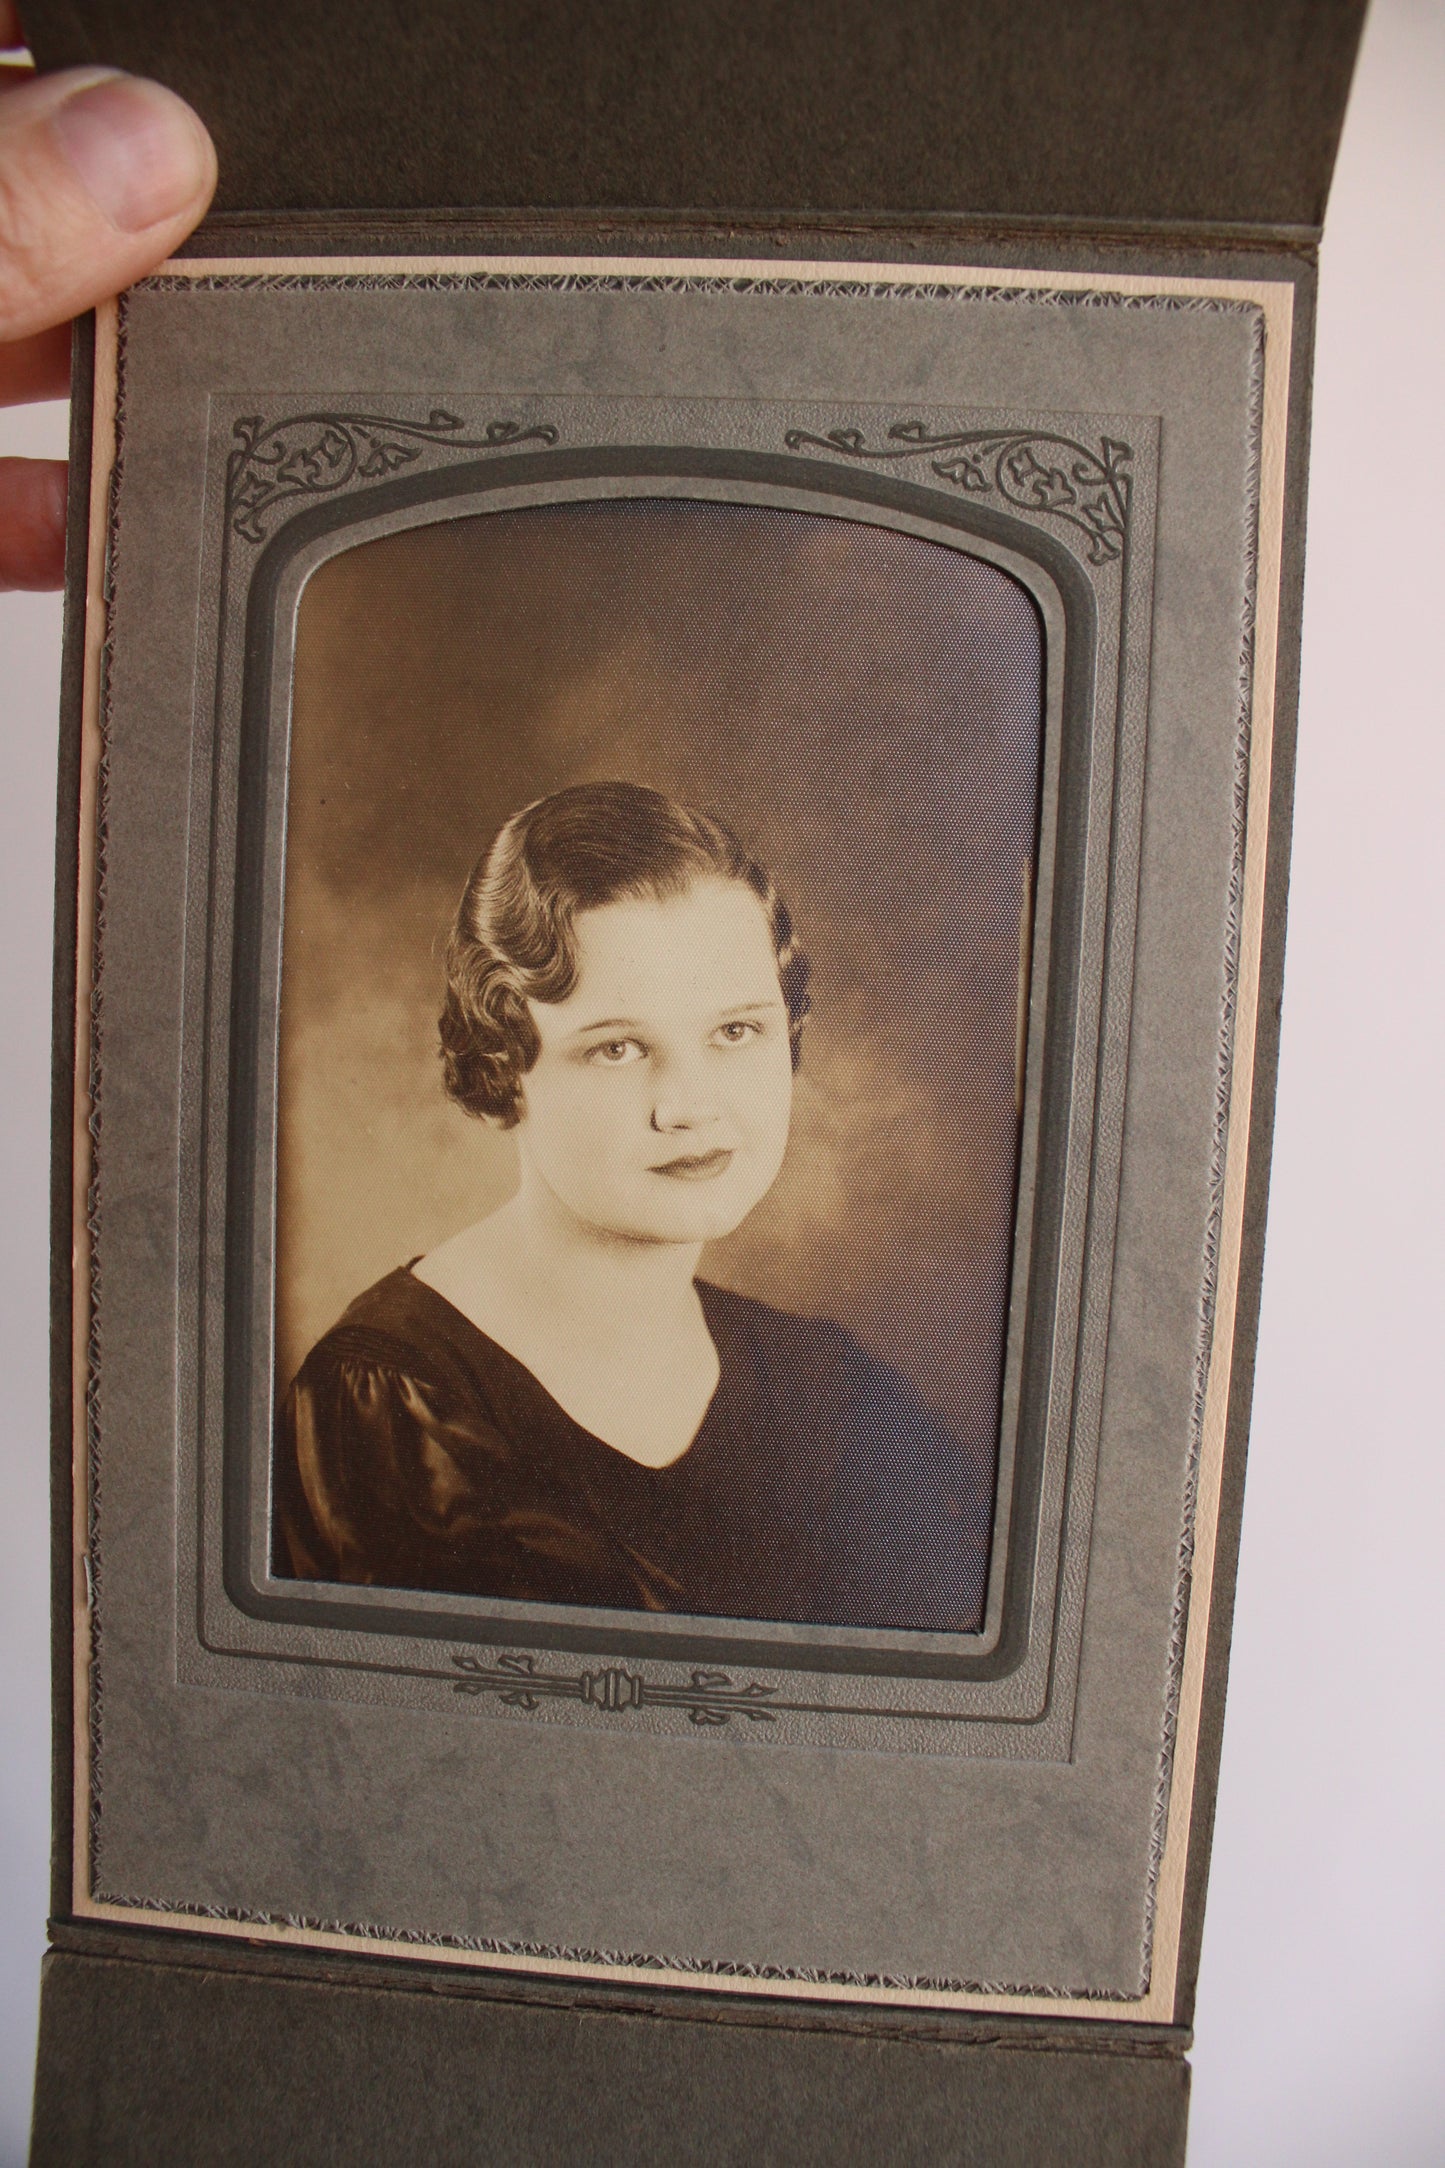 Vintage 1920s Photograph in Cardboard Cover